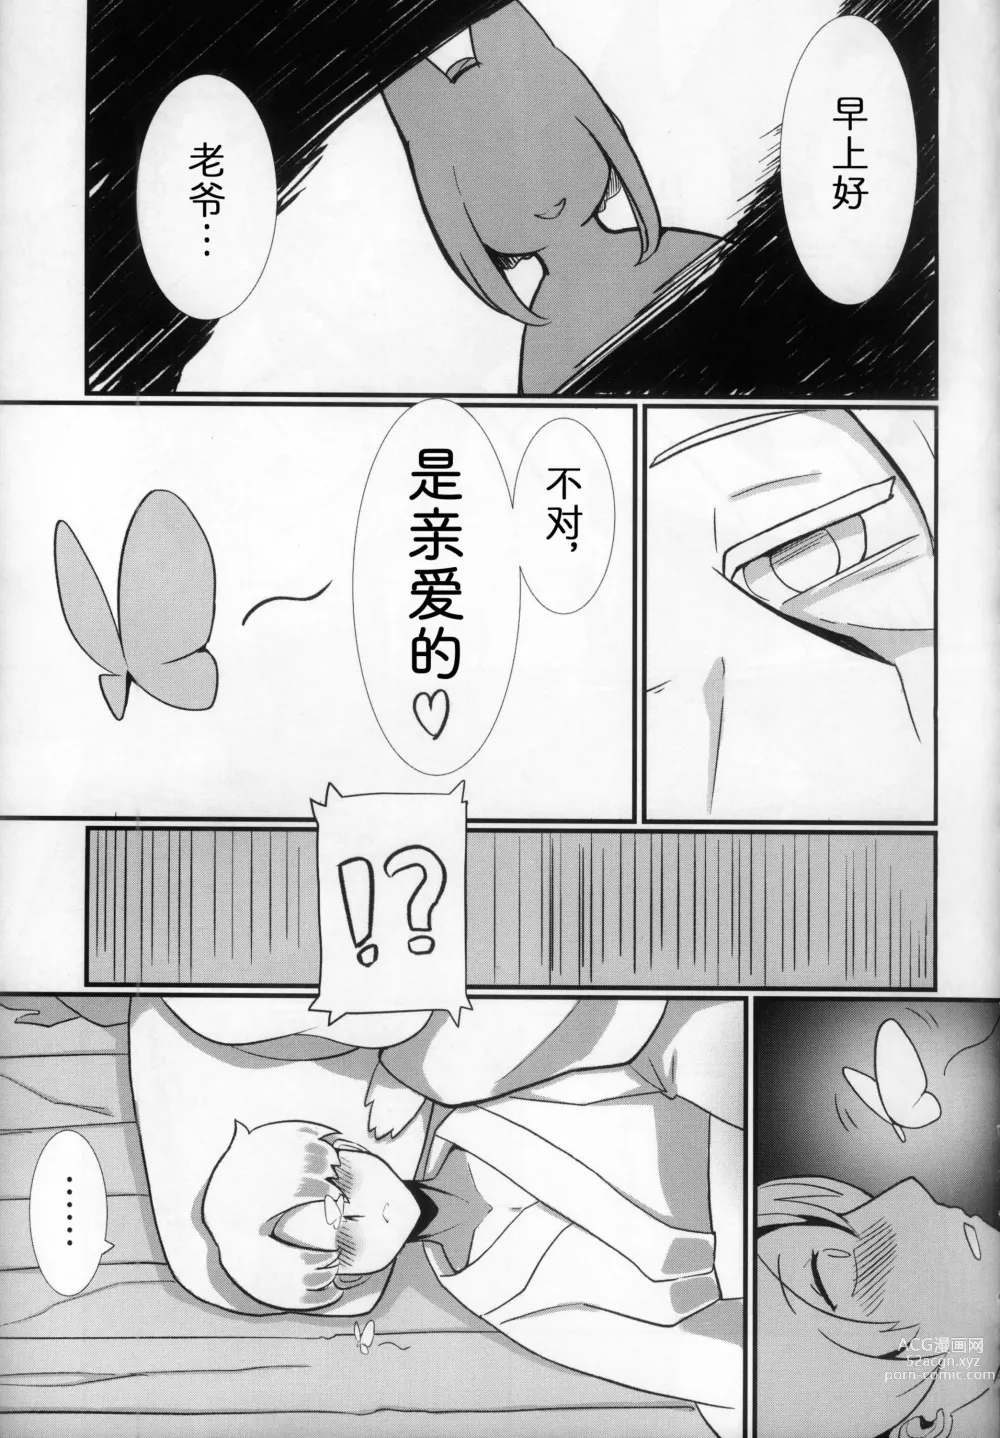 Page 5 of doujinshi 七彩之蝶